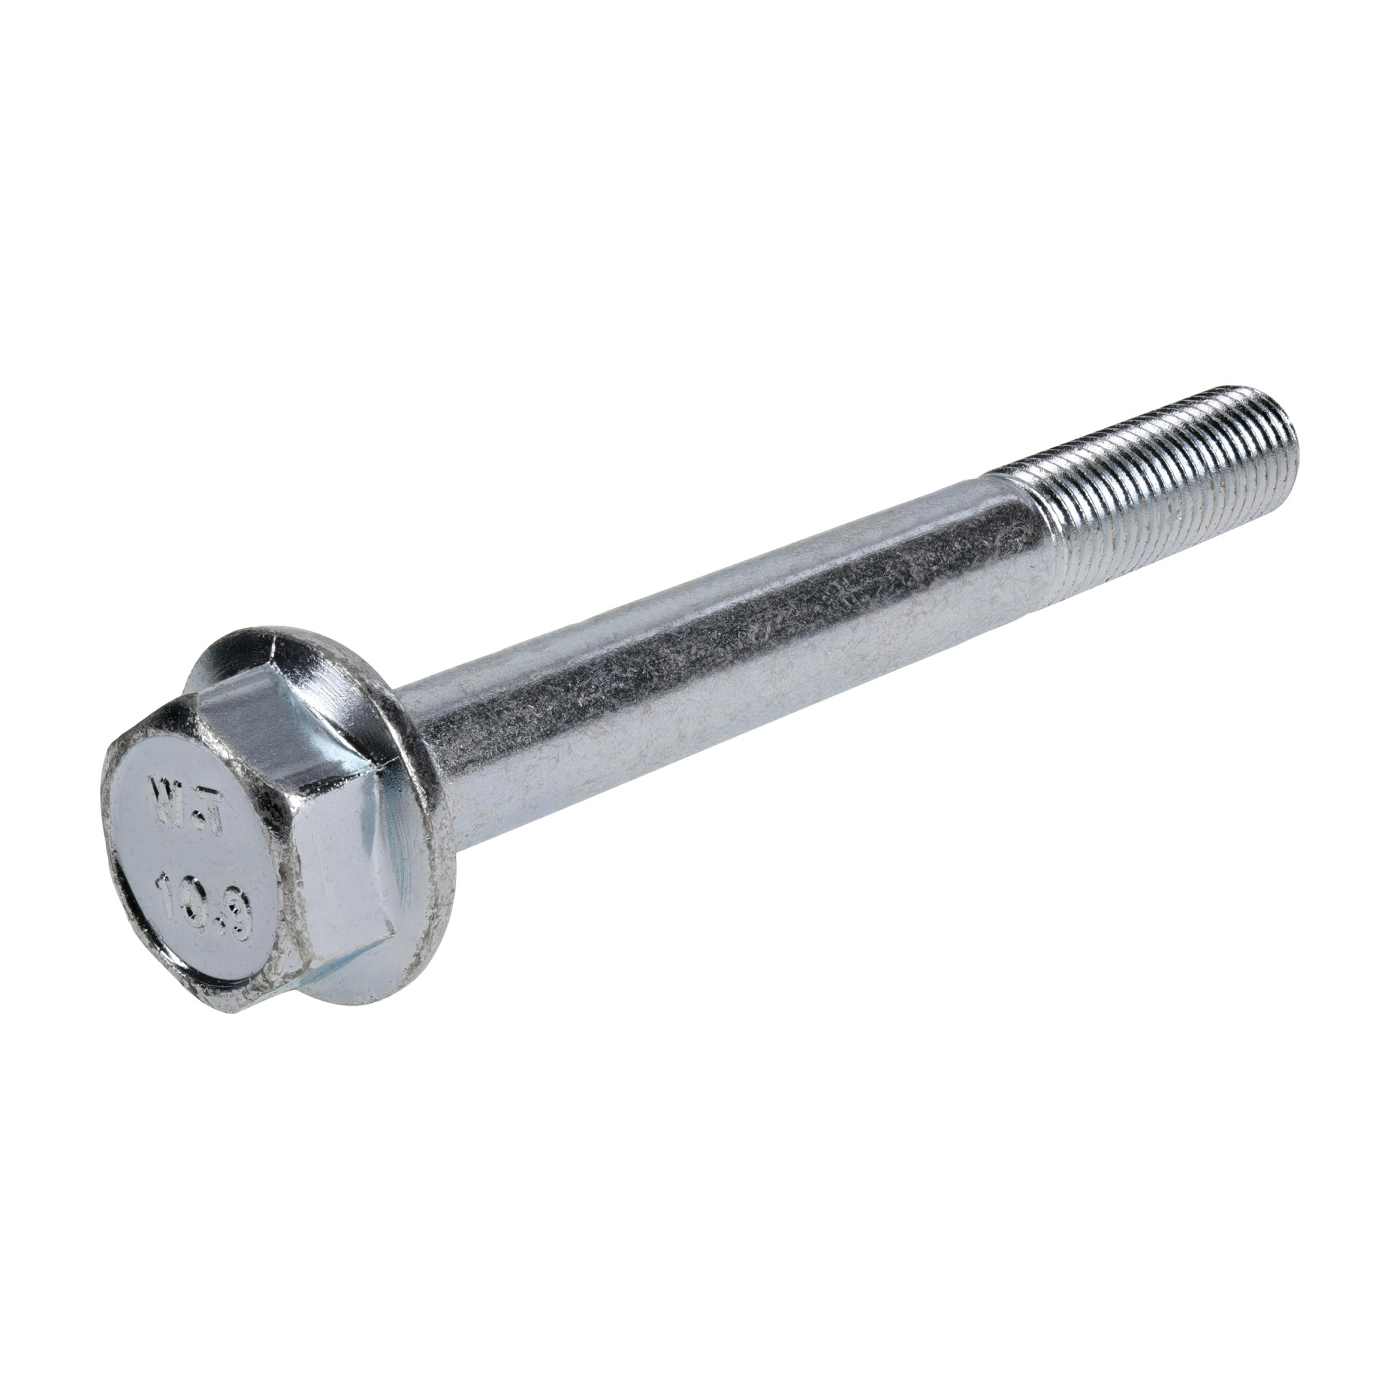 881023 Hex Bolt, 1/2 in Thread, 3 in OAL, 5 Grade, Steel, Zinc-Plated, SAE Measuring, Coarse Thread